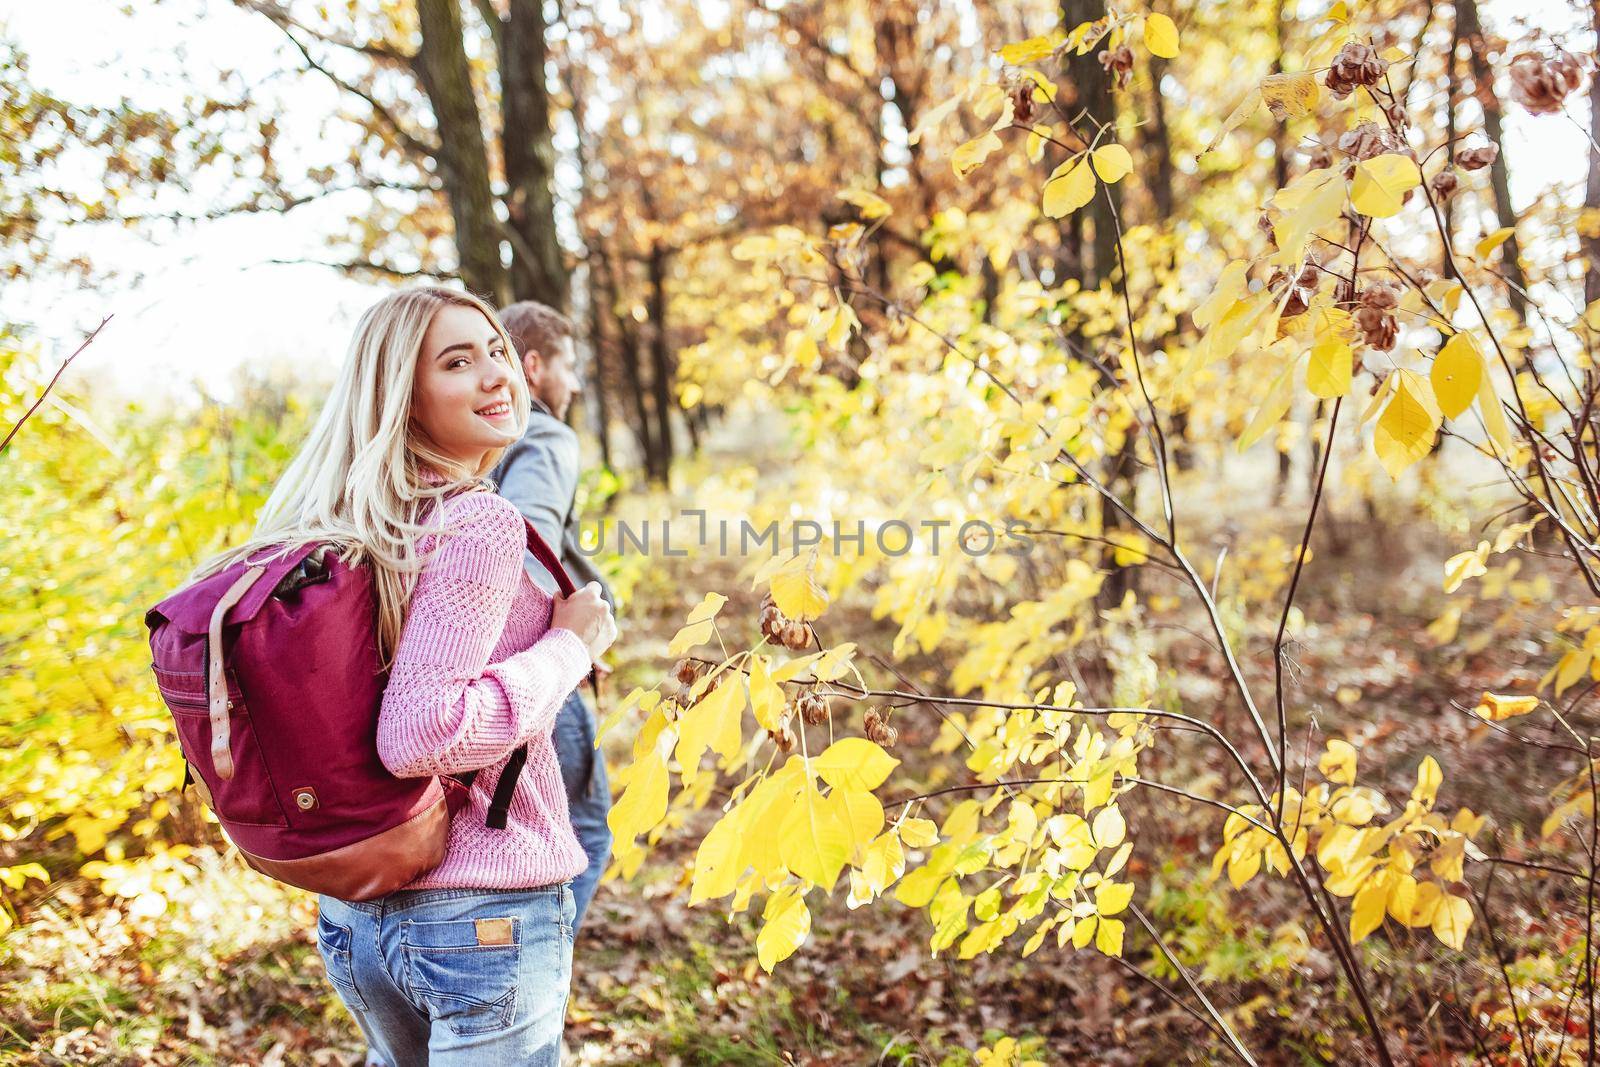 Happy travelers go to the autumn forest holding hands to meet new adventures. Focus on the charming blonde in the foreground who turned around looking at the camera. Togetherness with nature concept.